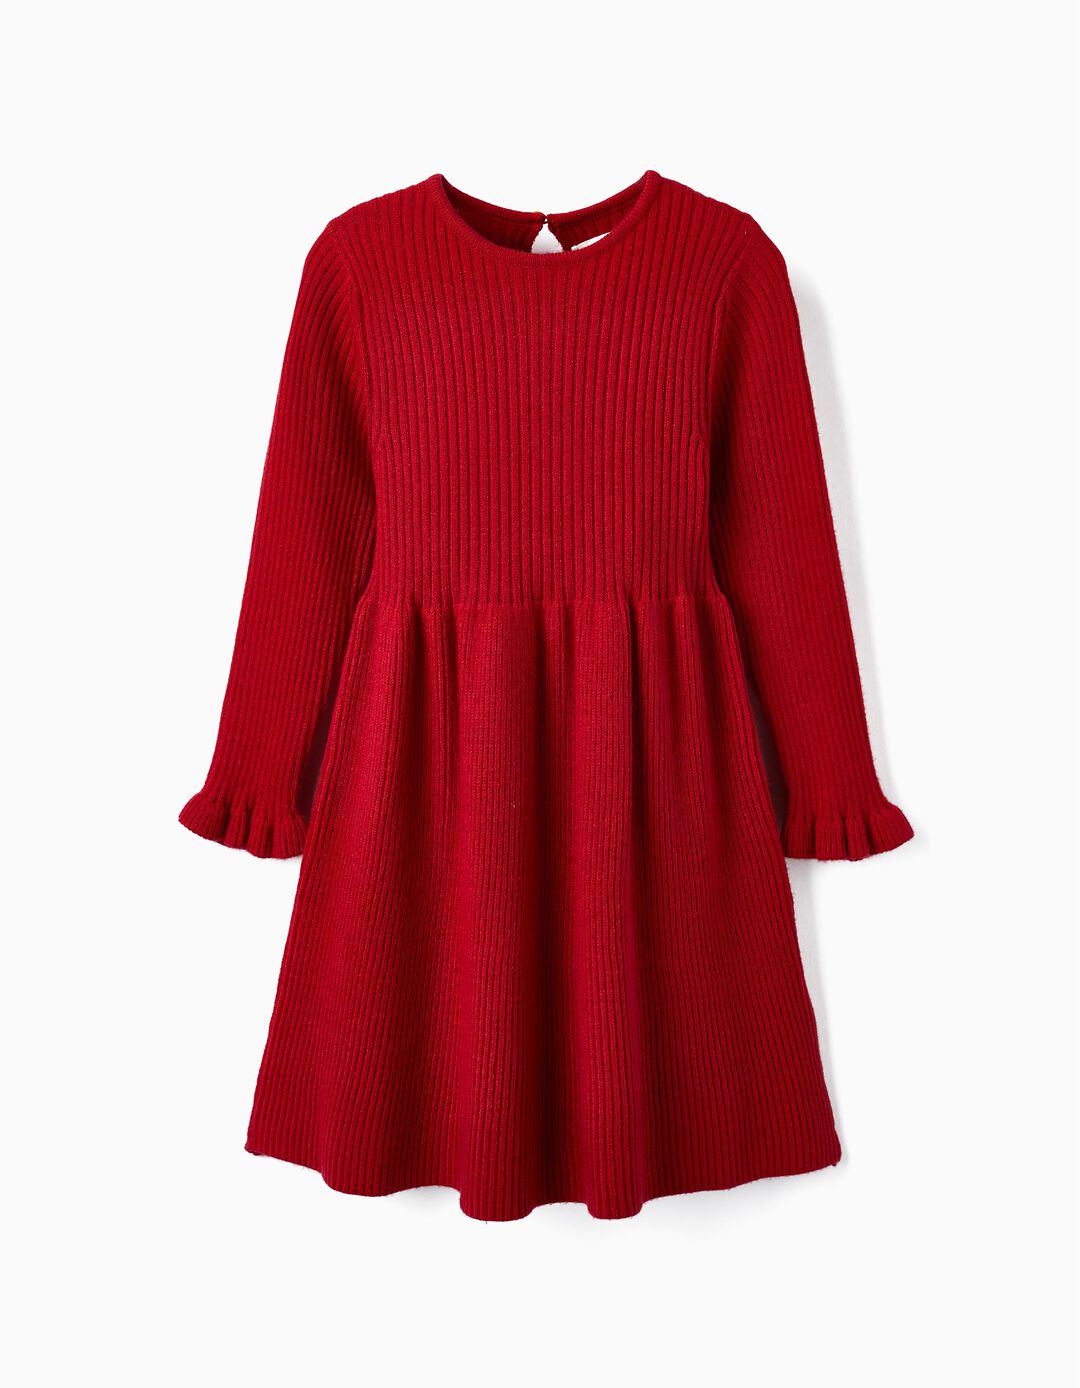 Long Sleeve Ribbed Knit Dress for Girls, Red